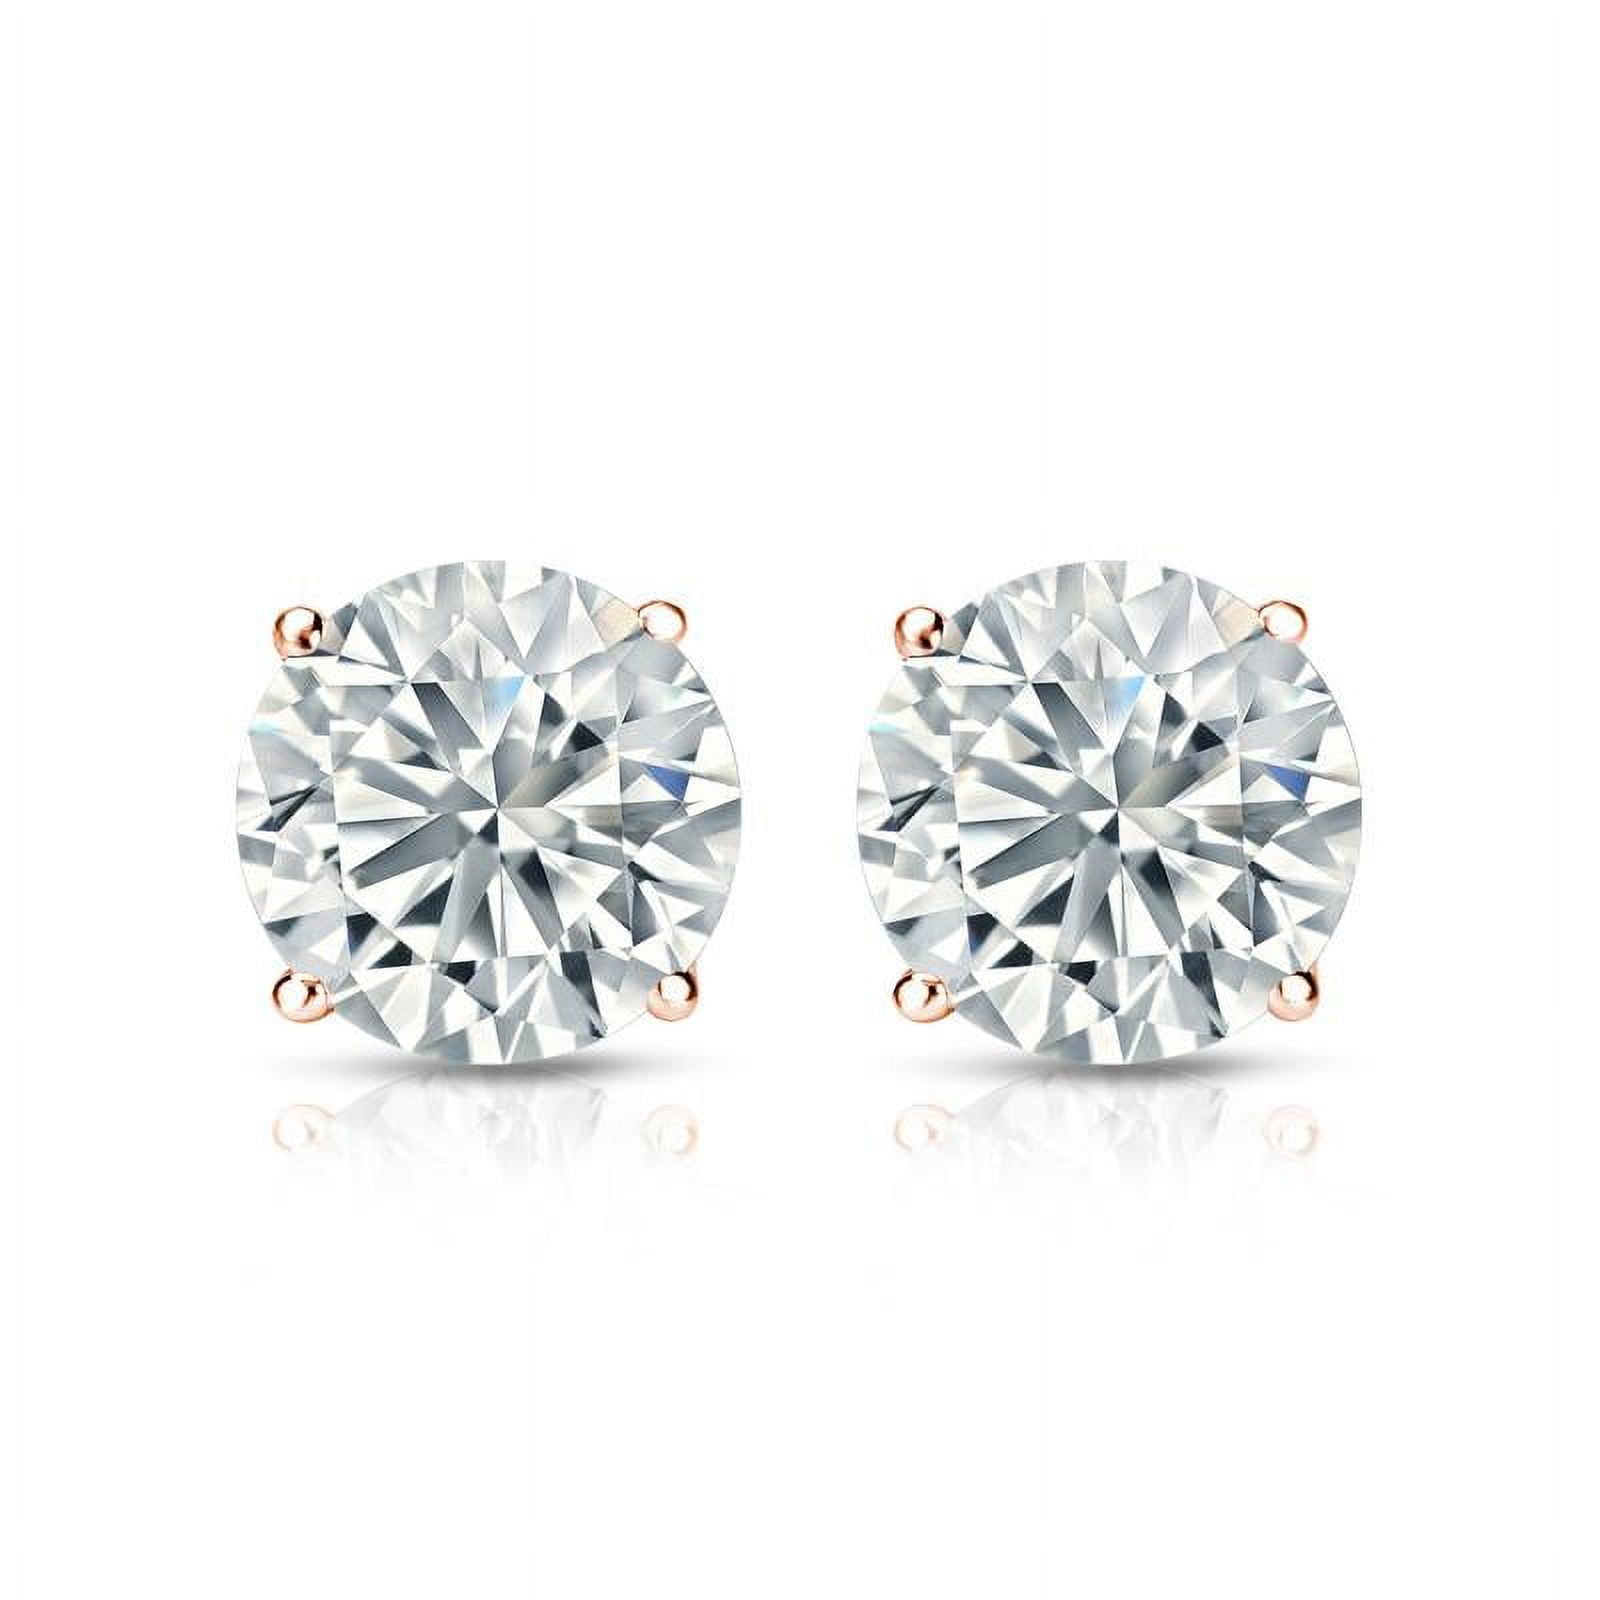 4 Prong 0.5 Carat Round Shaped Moissanite Solitaire Stud Earrings in 18K White Gold Plating Over Silver, Women's, Size: One Size